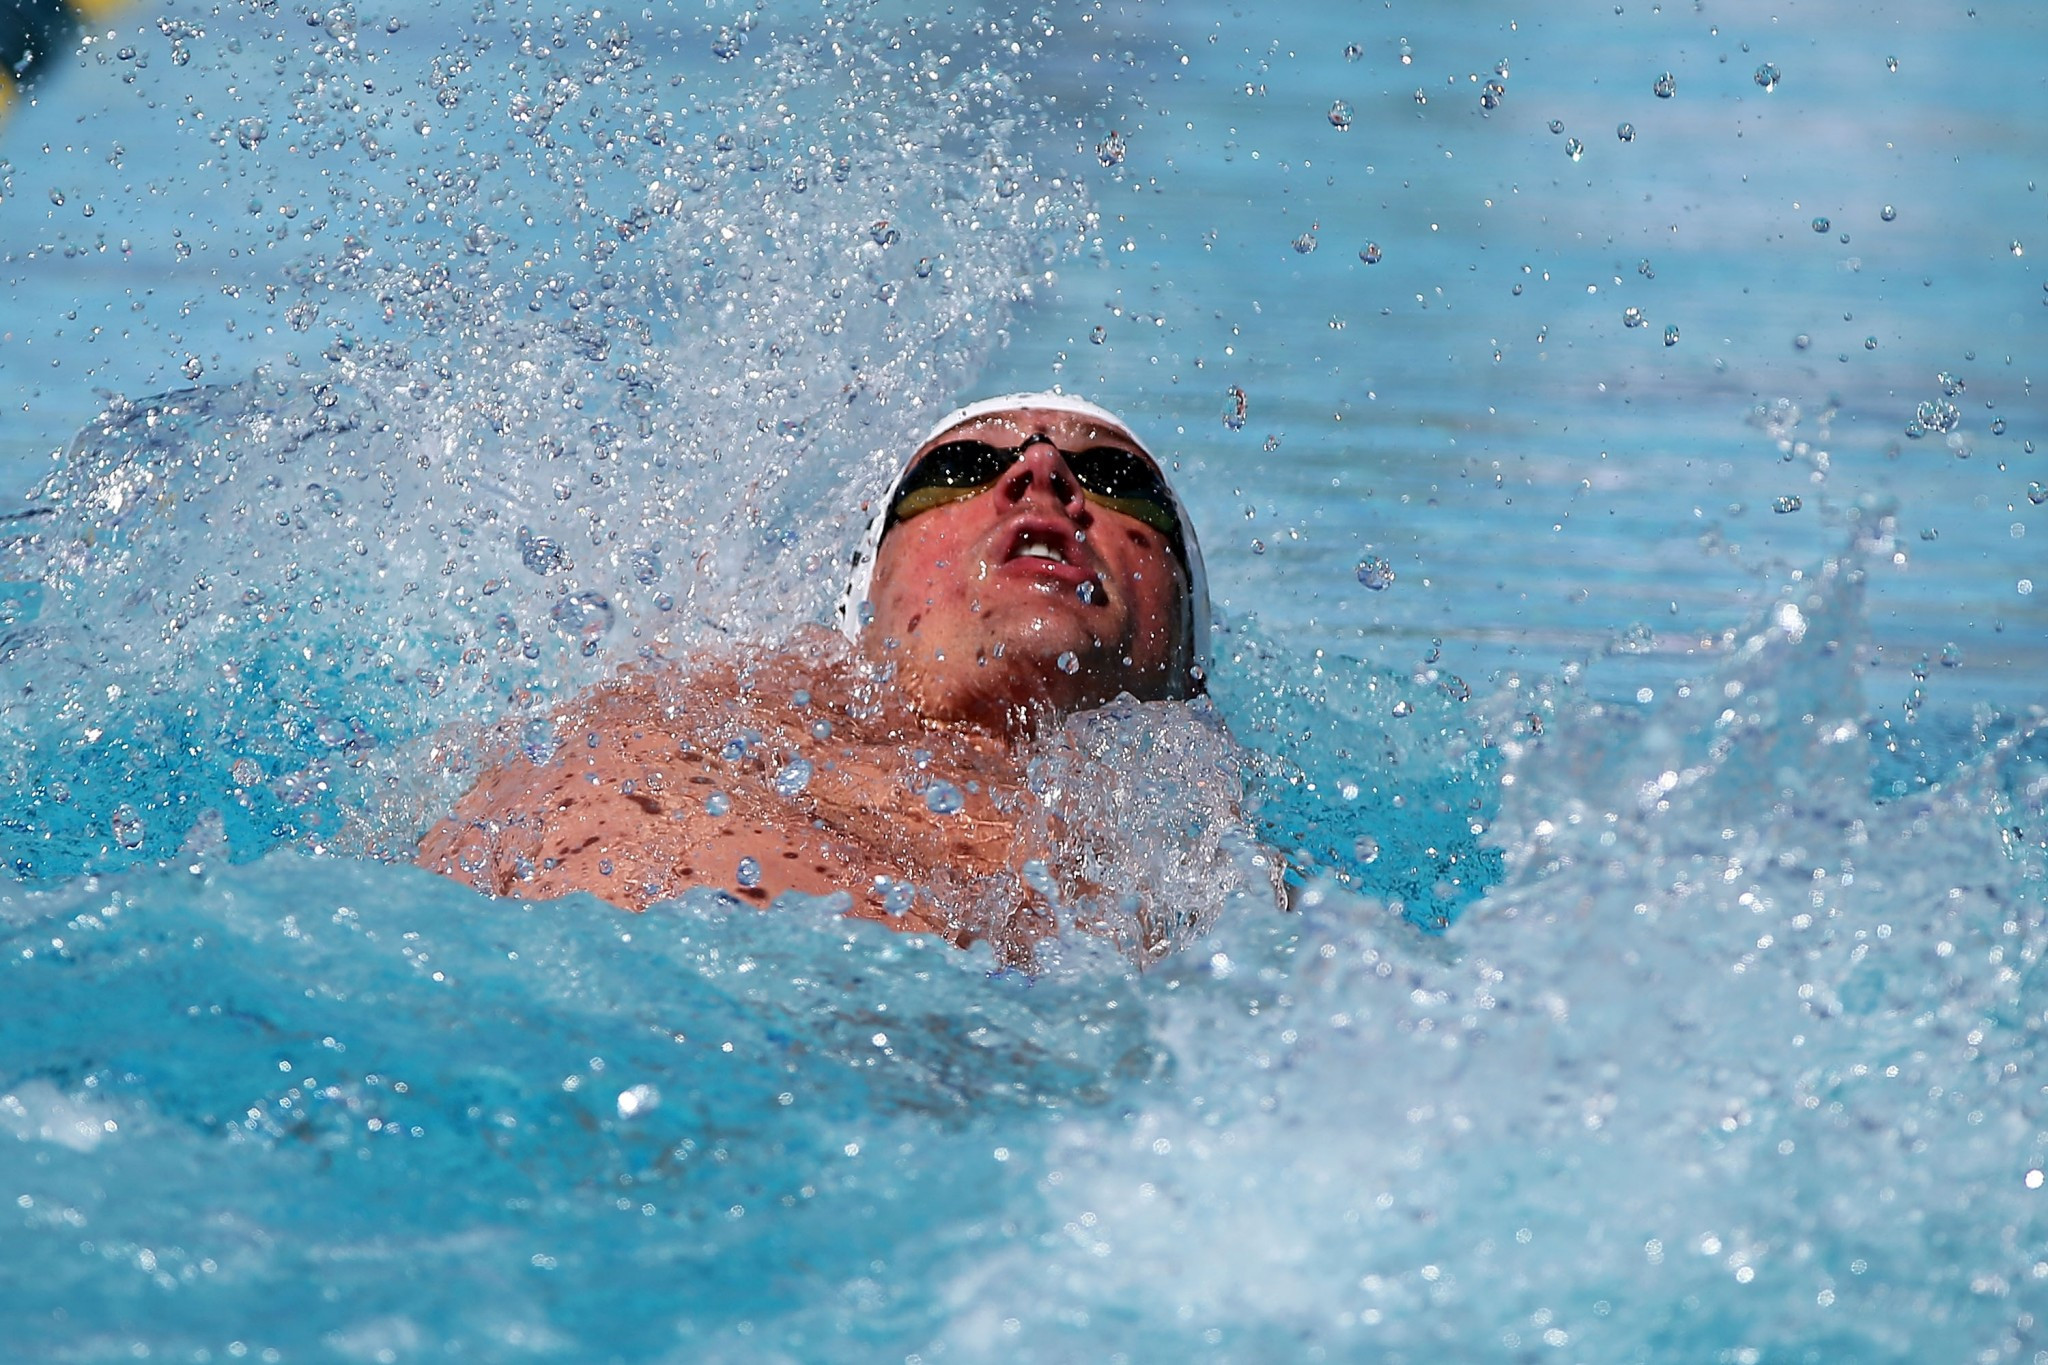 Ryan Lochte finished fifth in the men's 100 metres backstroke in New York ©Getty Images